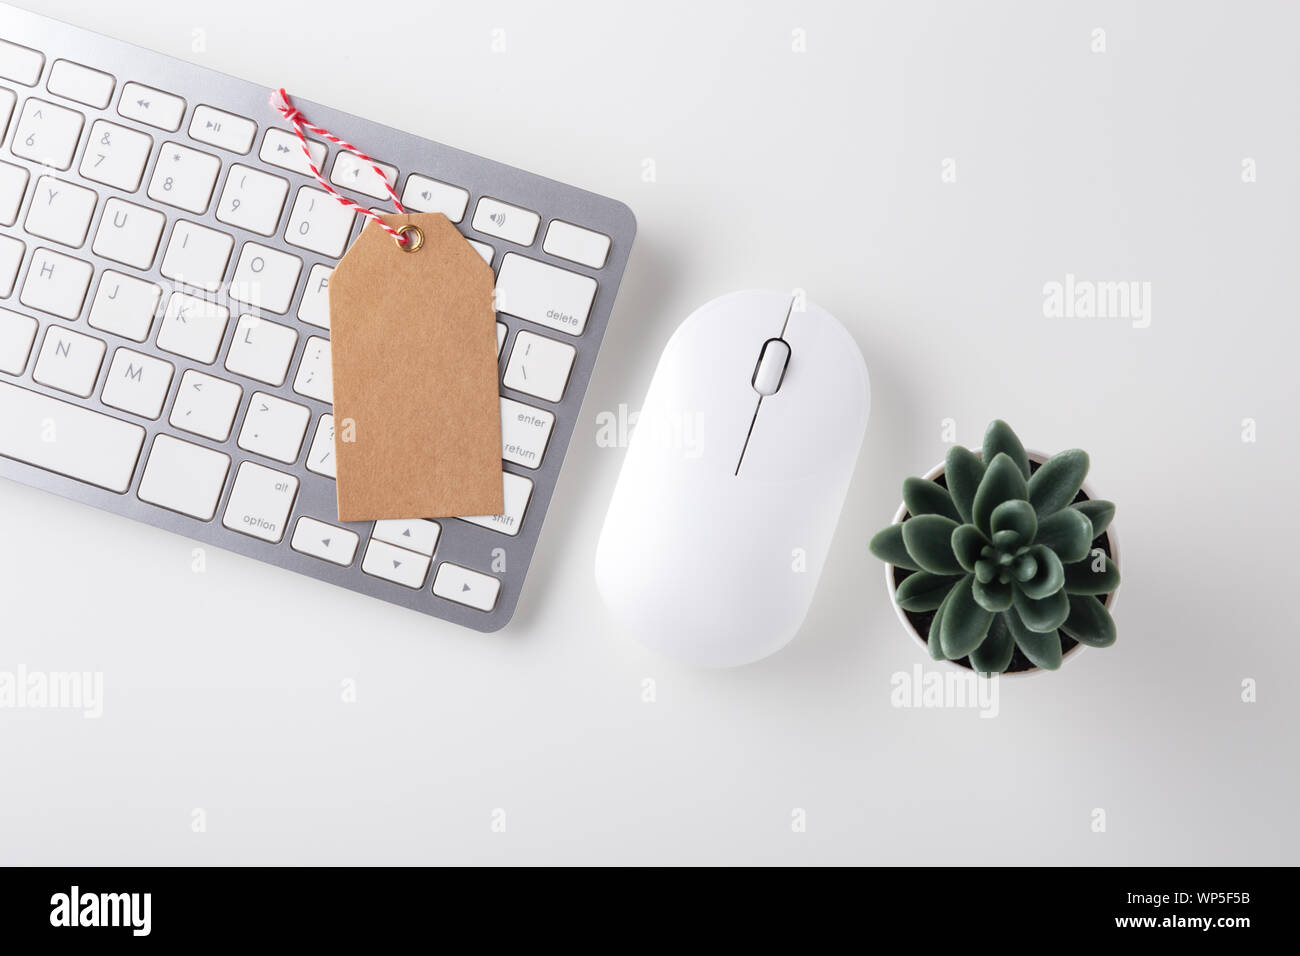 Cyber Monday Sale Concept With Sale Tag On Computer Keyboard On